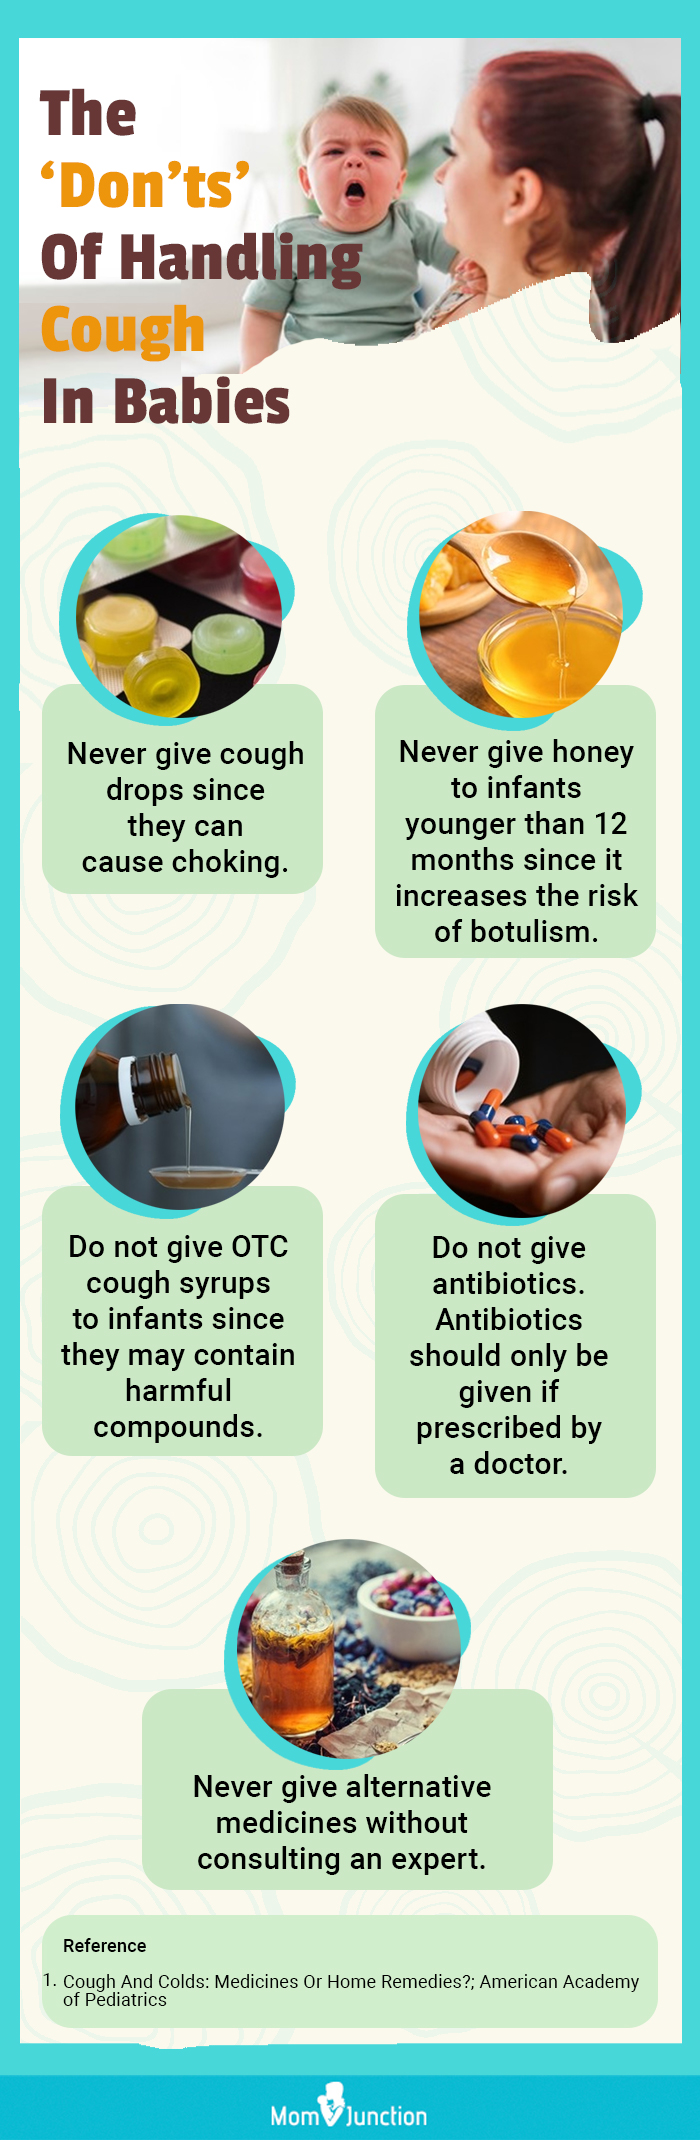 the donts of handling cough in babies [infographic]